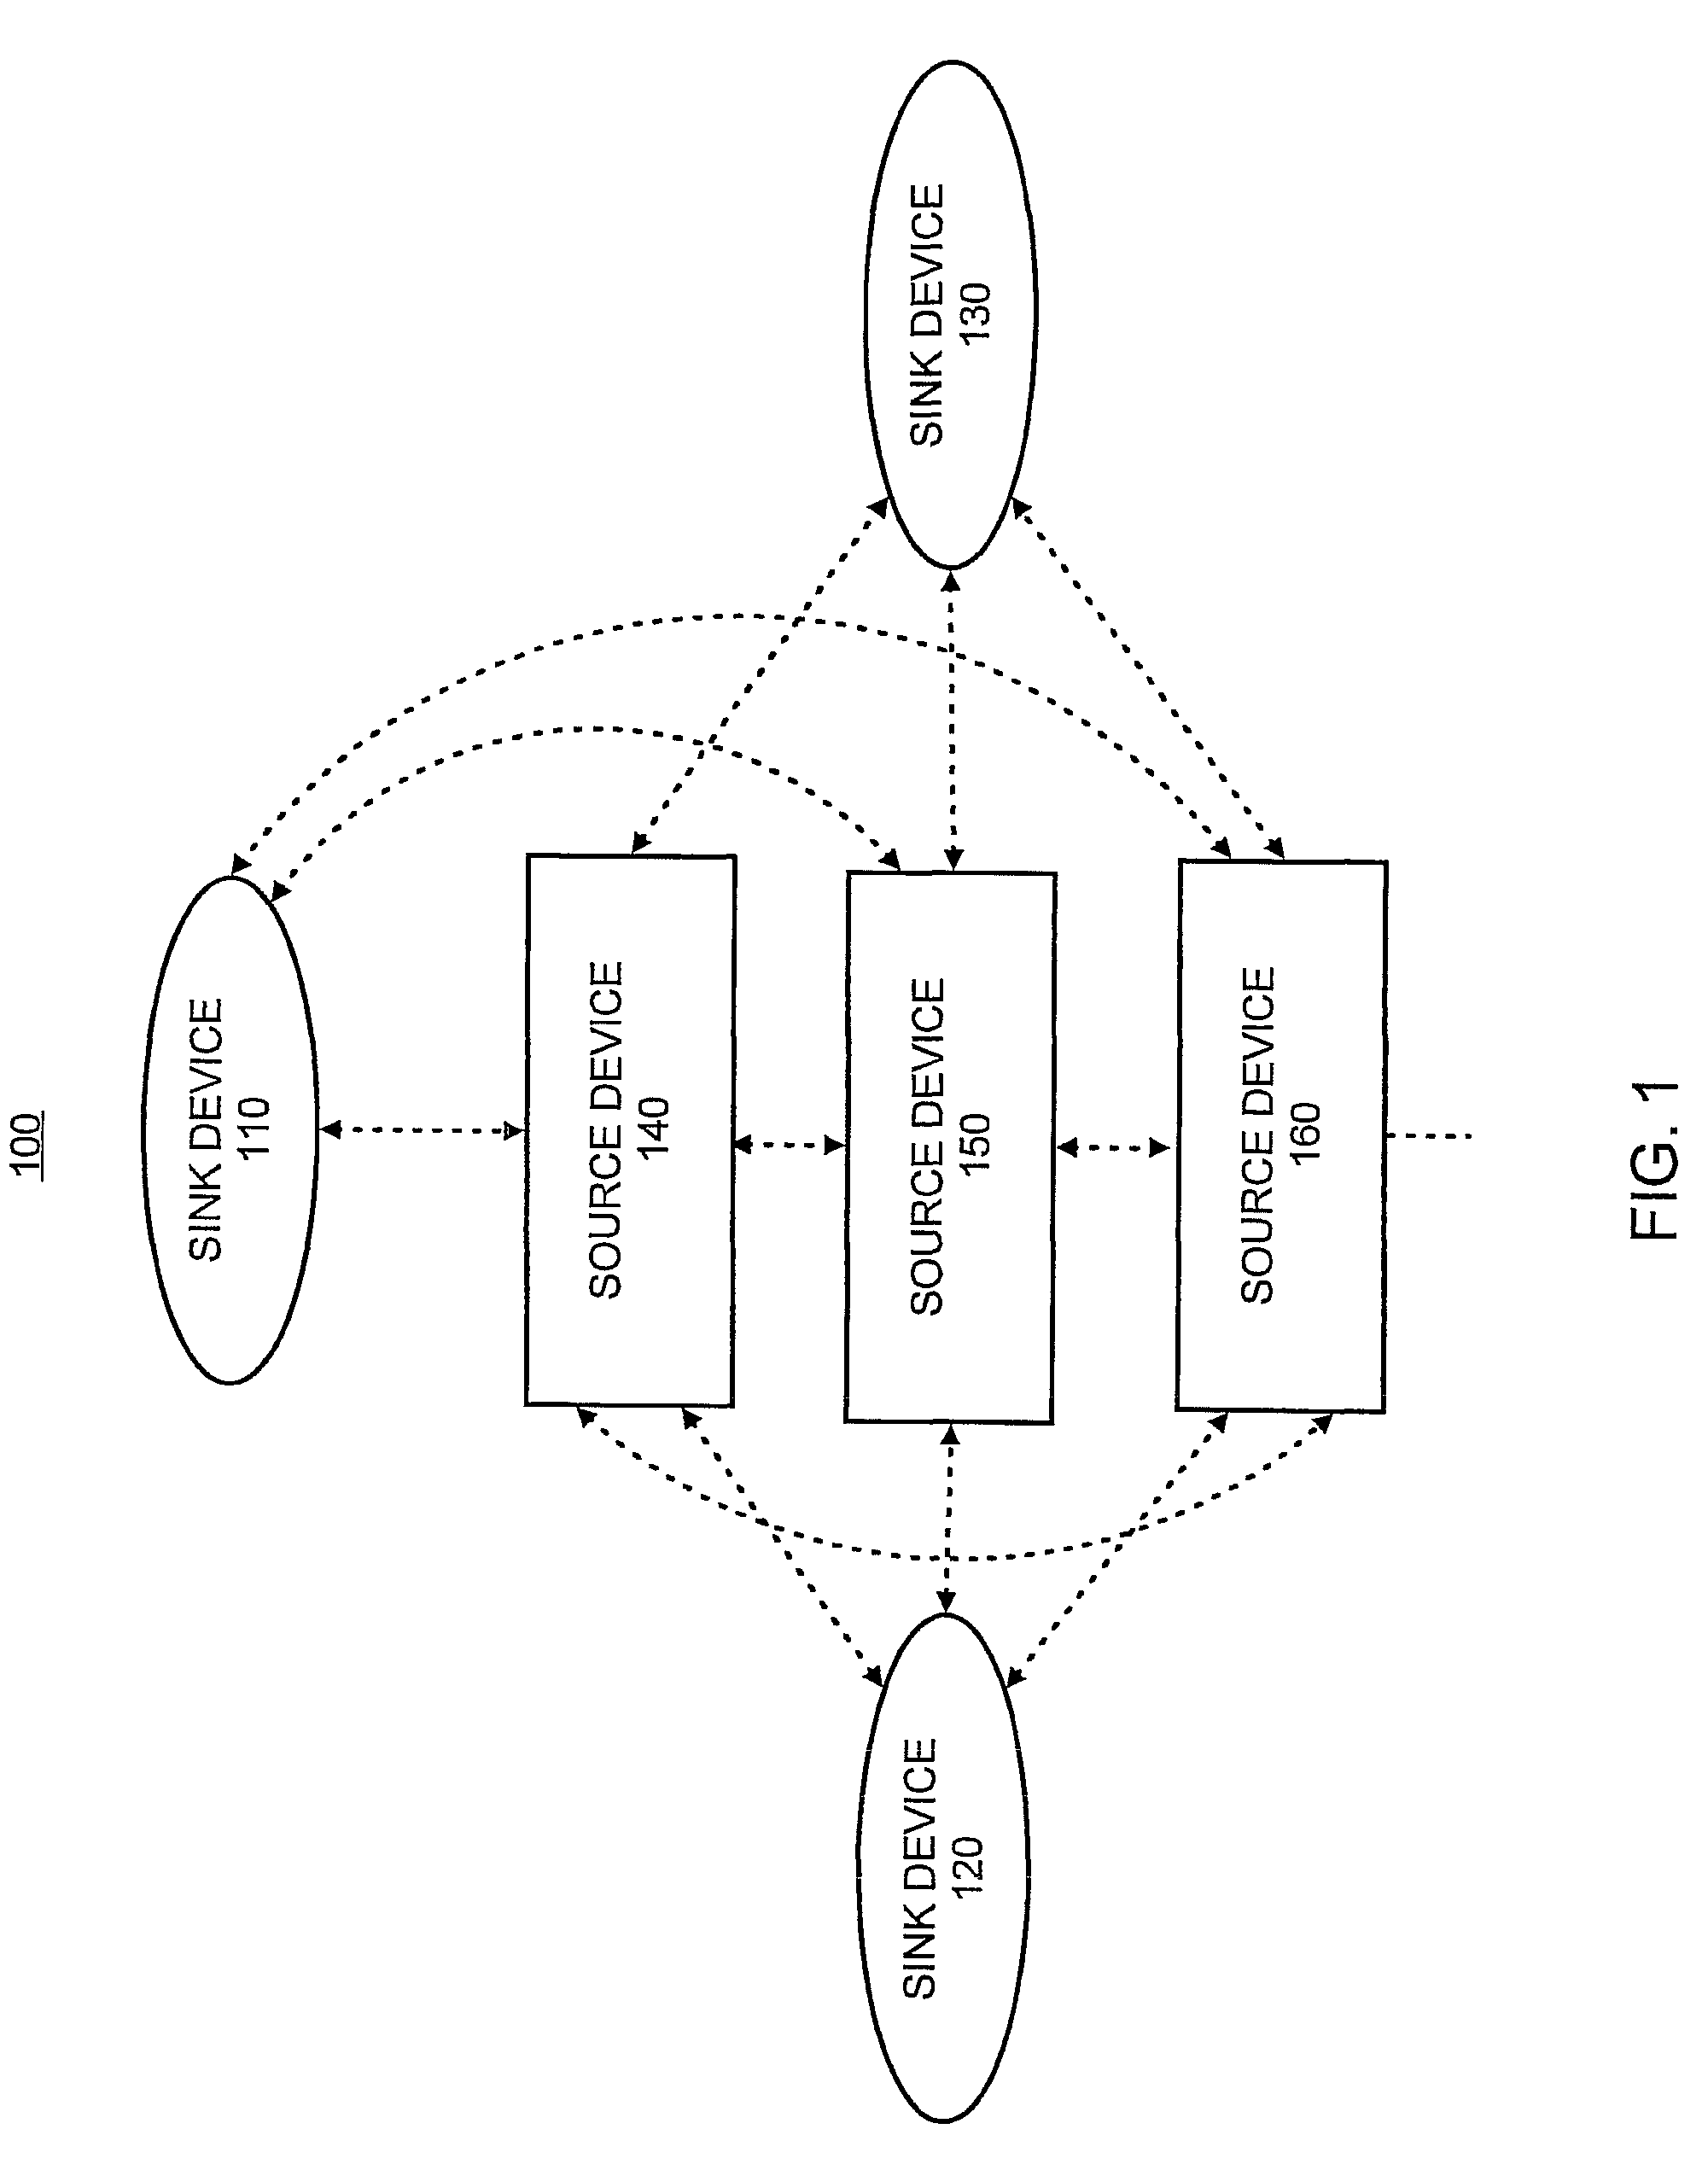 Personal identification number (PIN) generation between two devices in a network